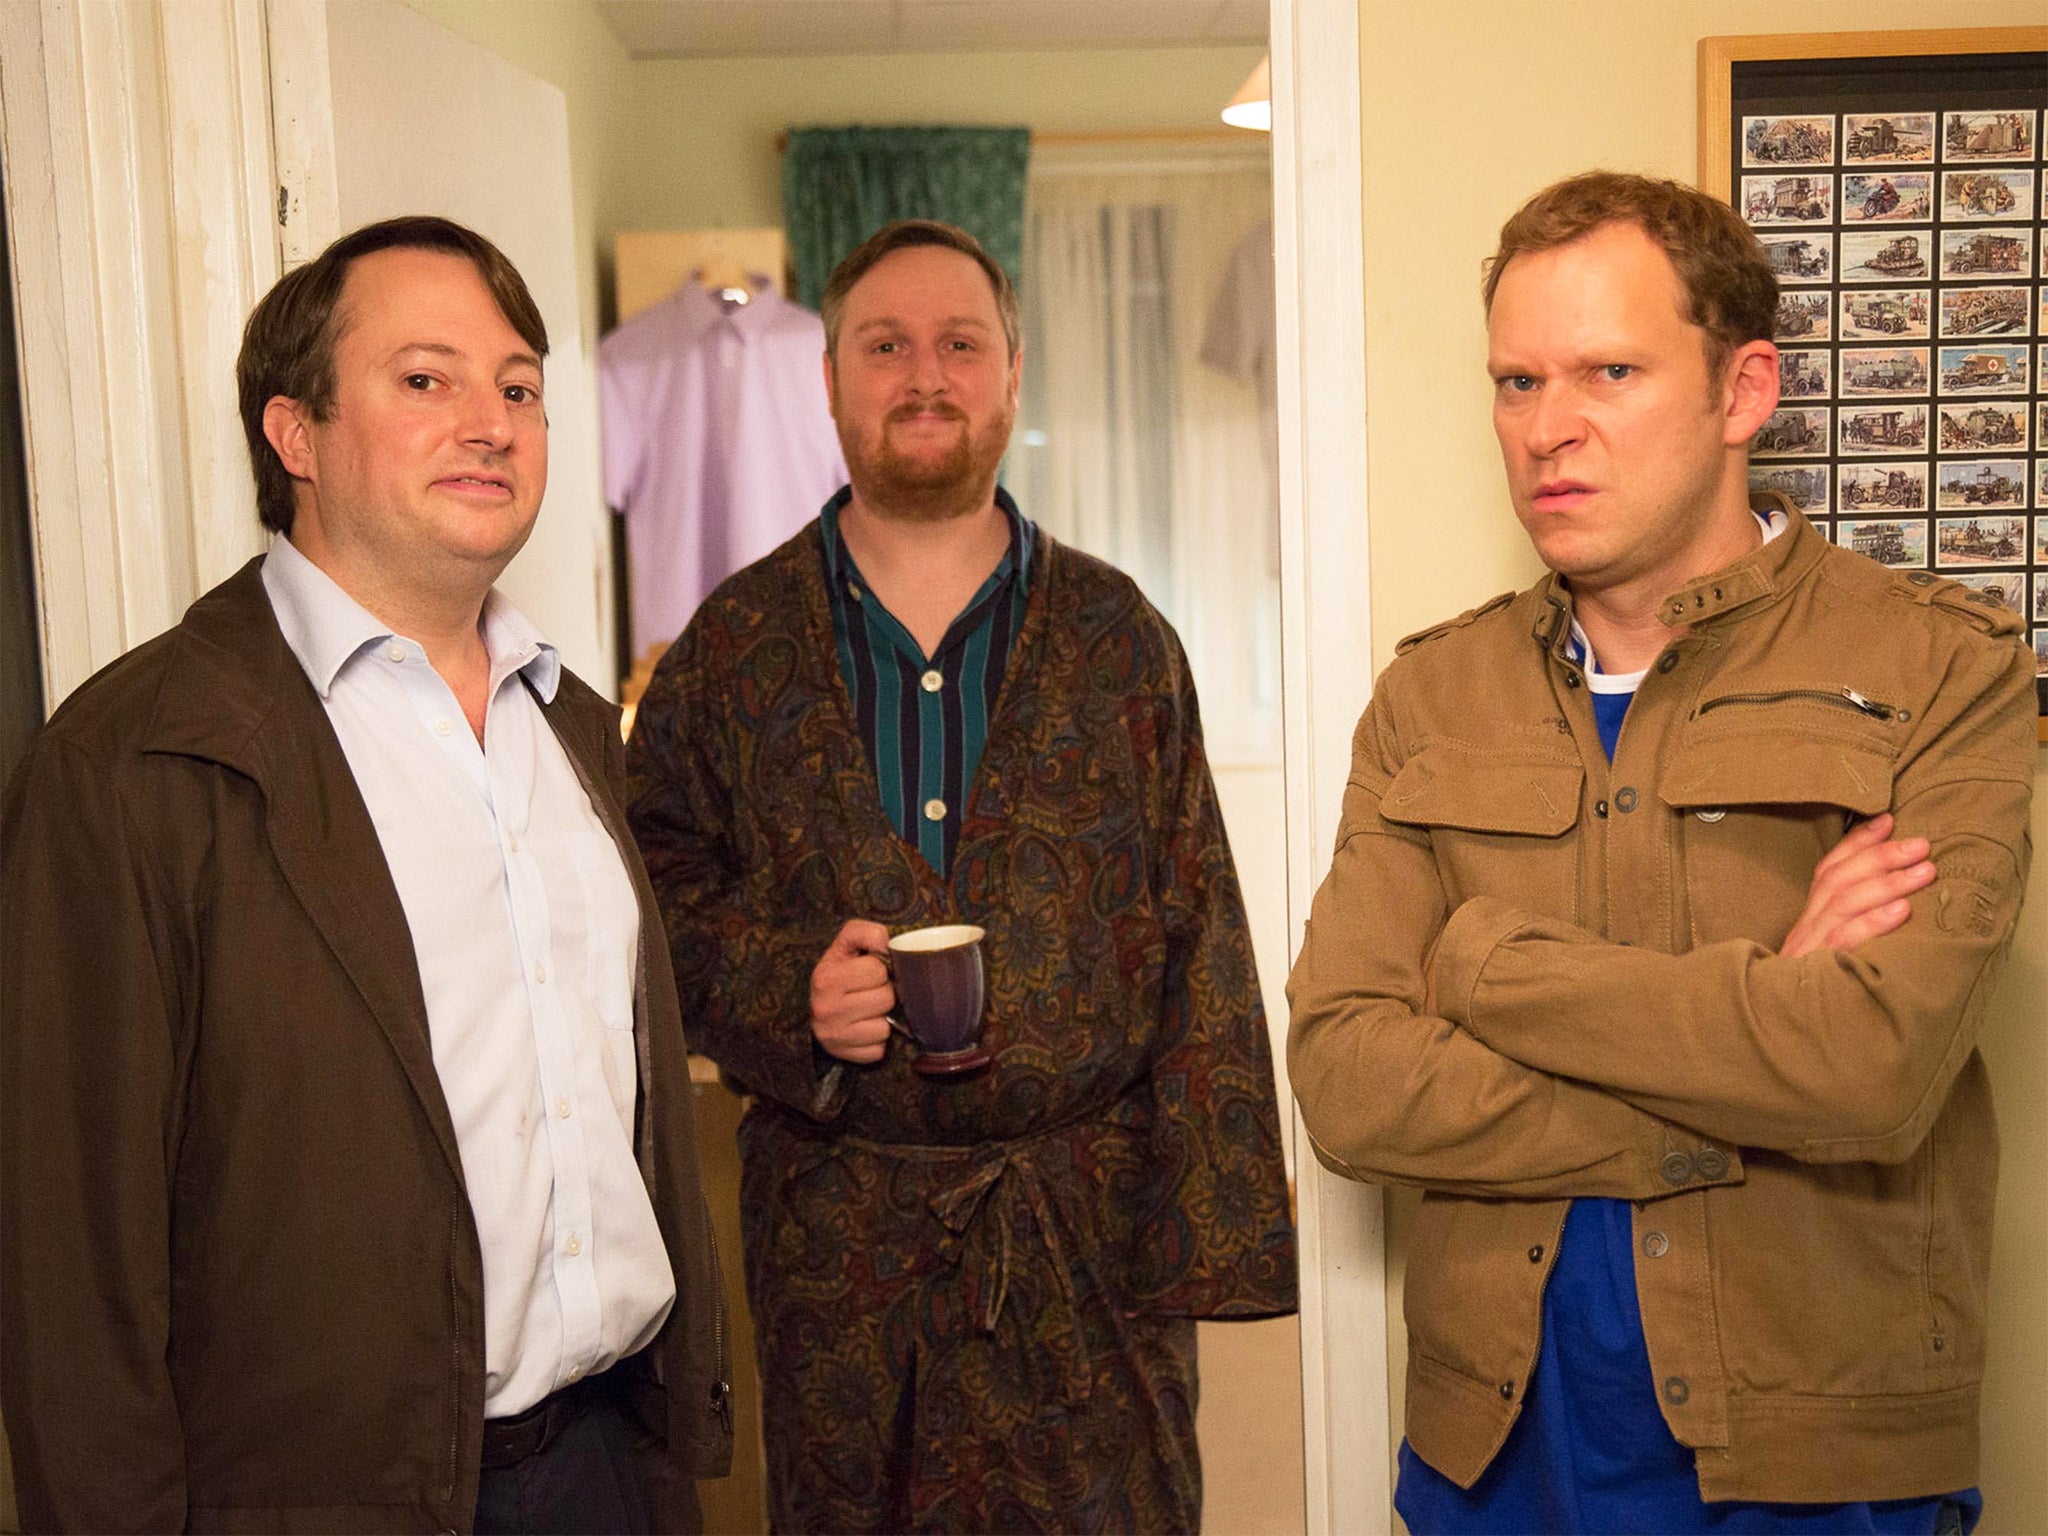 Back in the frame: David Mitchell, Tim Key and Robert Webb in ‘Peep Show’